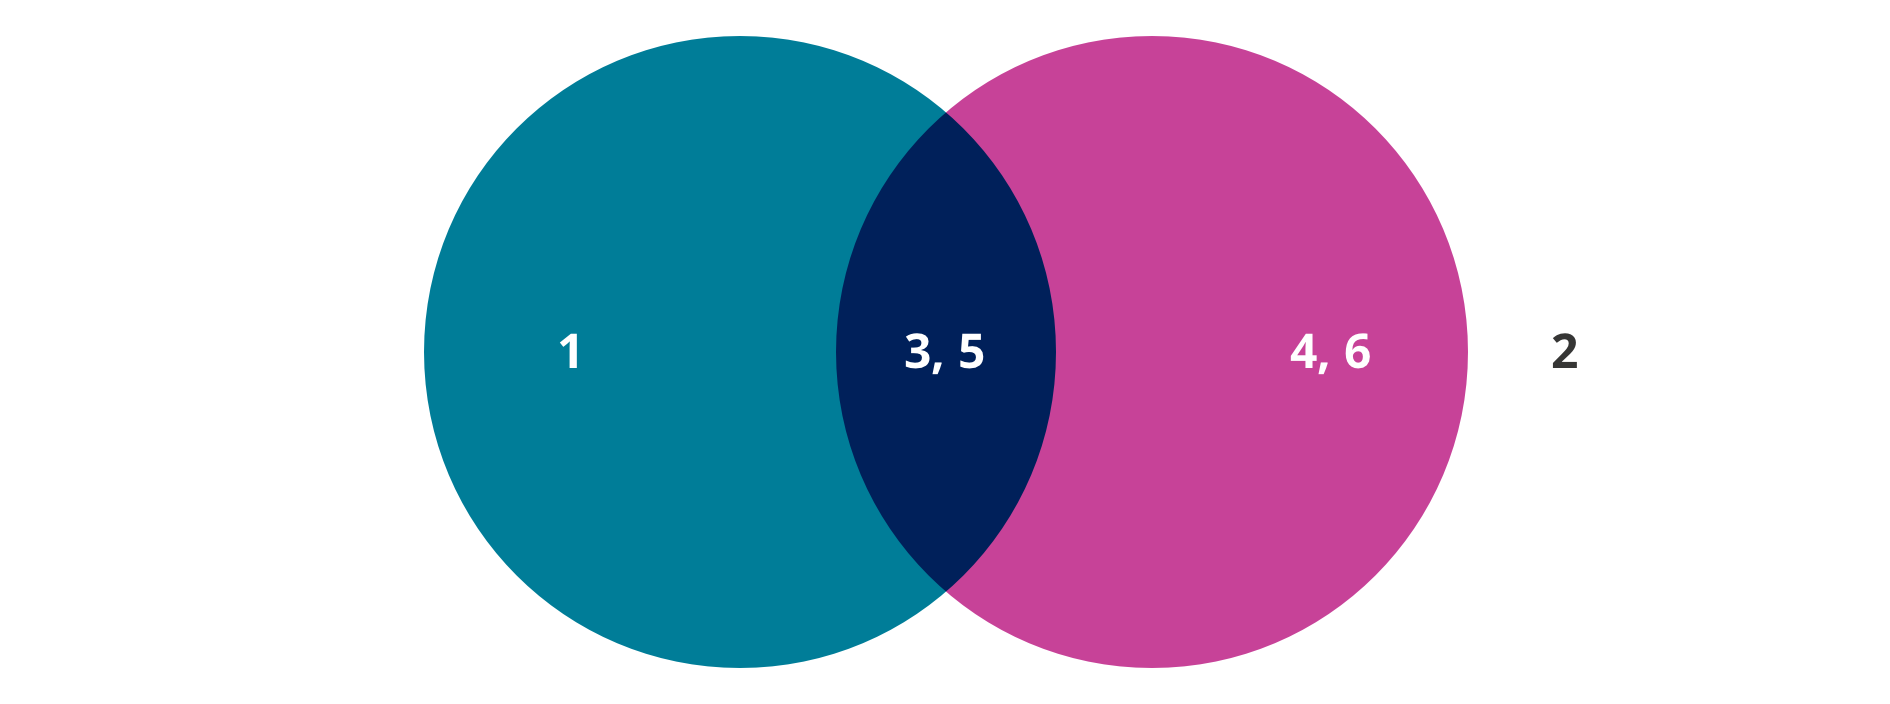 venn diagram, 1 on the left circle, 4, 6 on the right circle, 3,5 in the overlap and 2 outside any circles